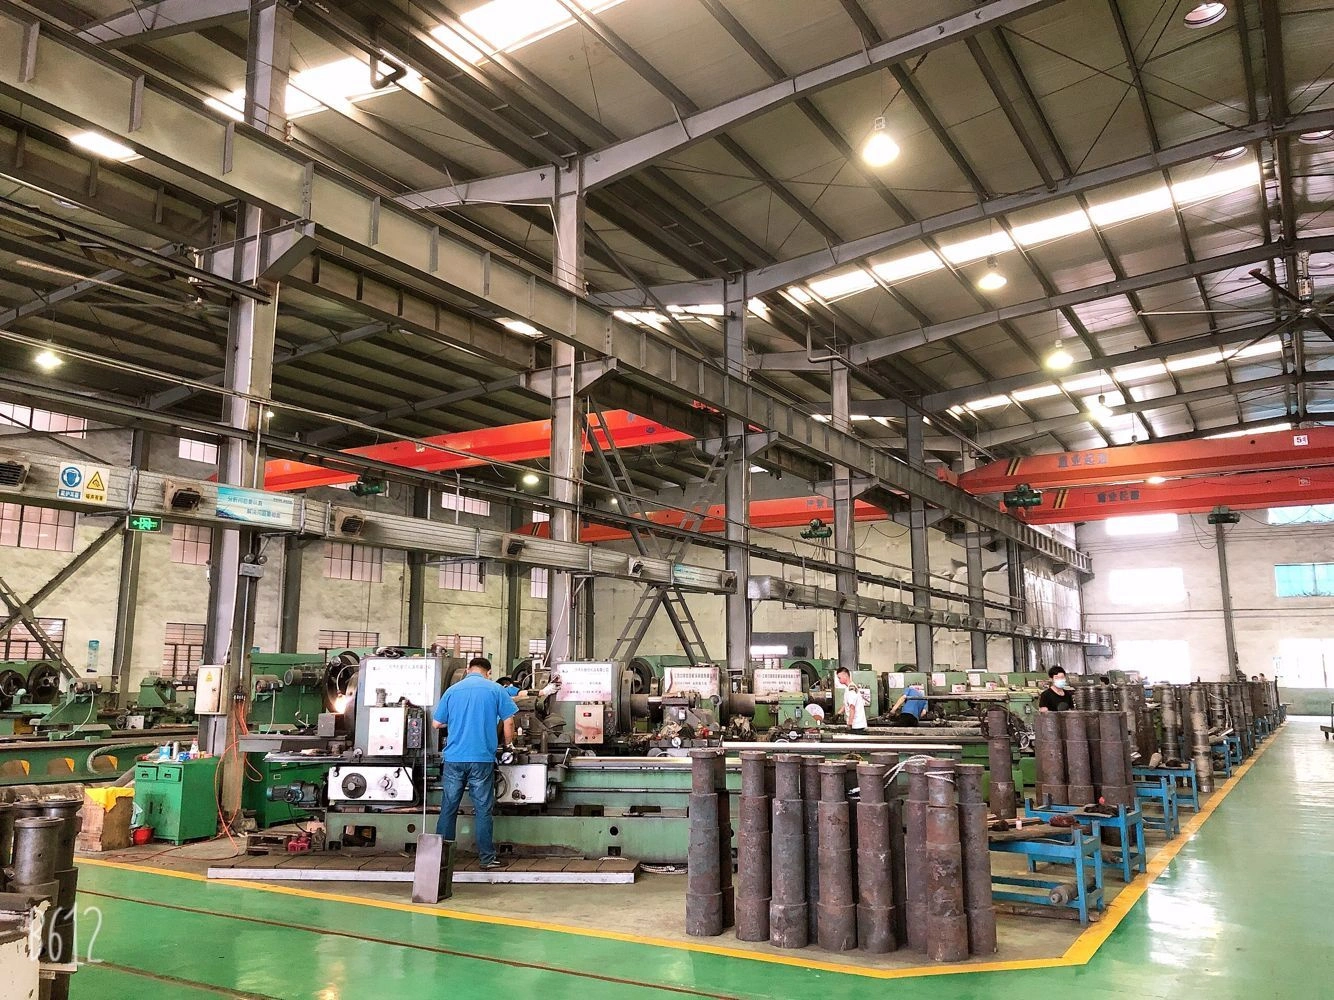 conical twin screw barrel, most produced at our factory, always available at our factory |E.J.S INDUSTRY CO., LTD